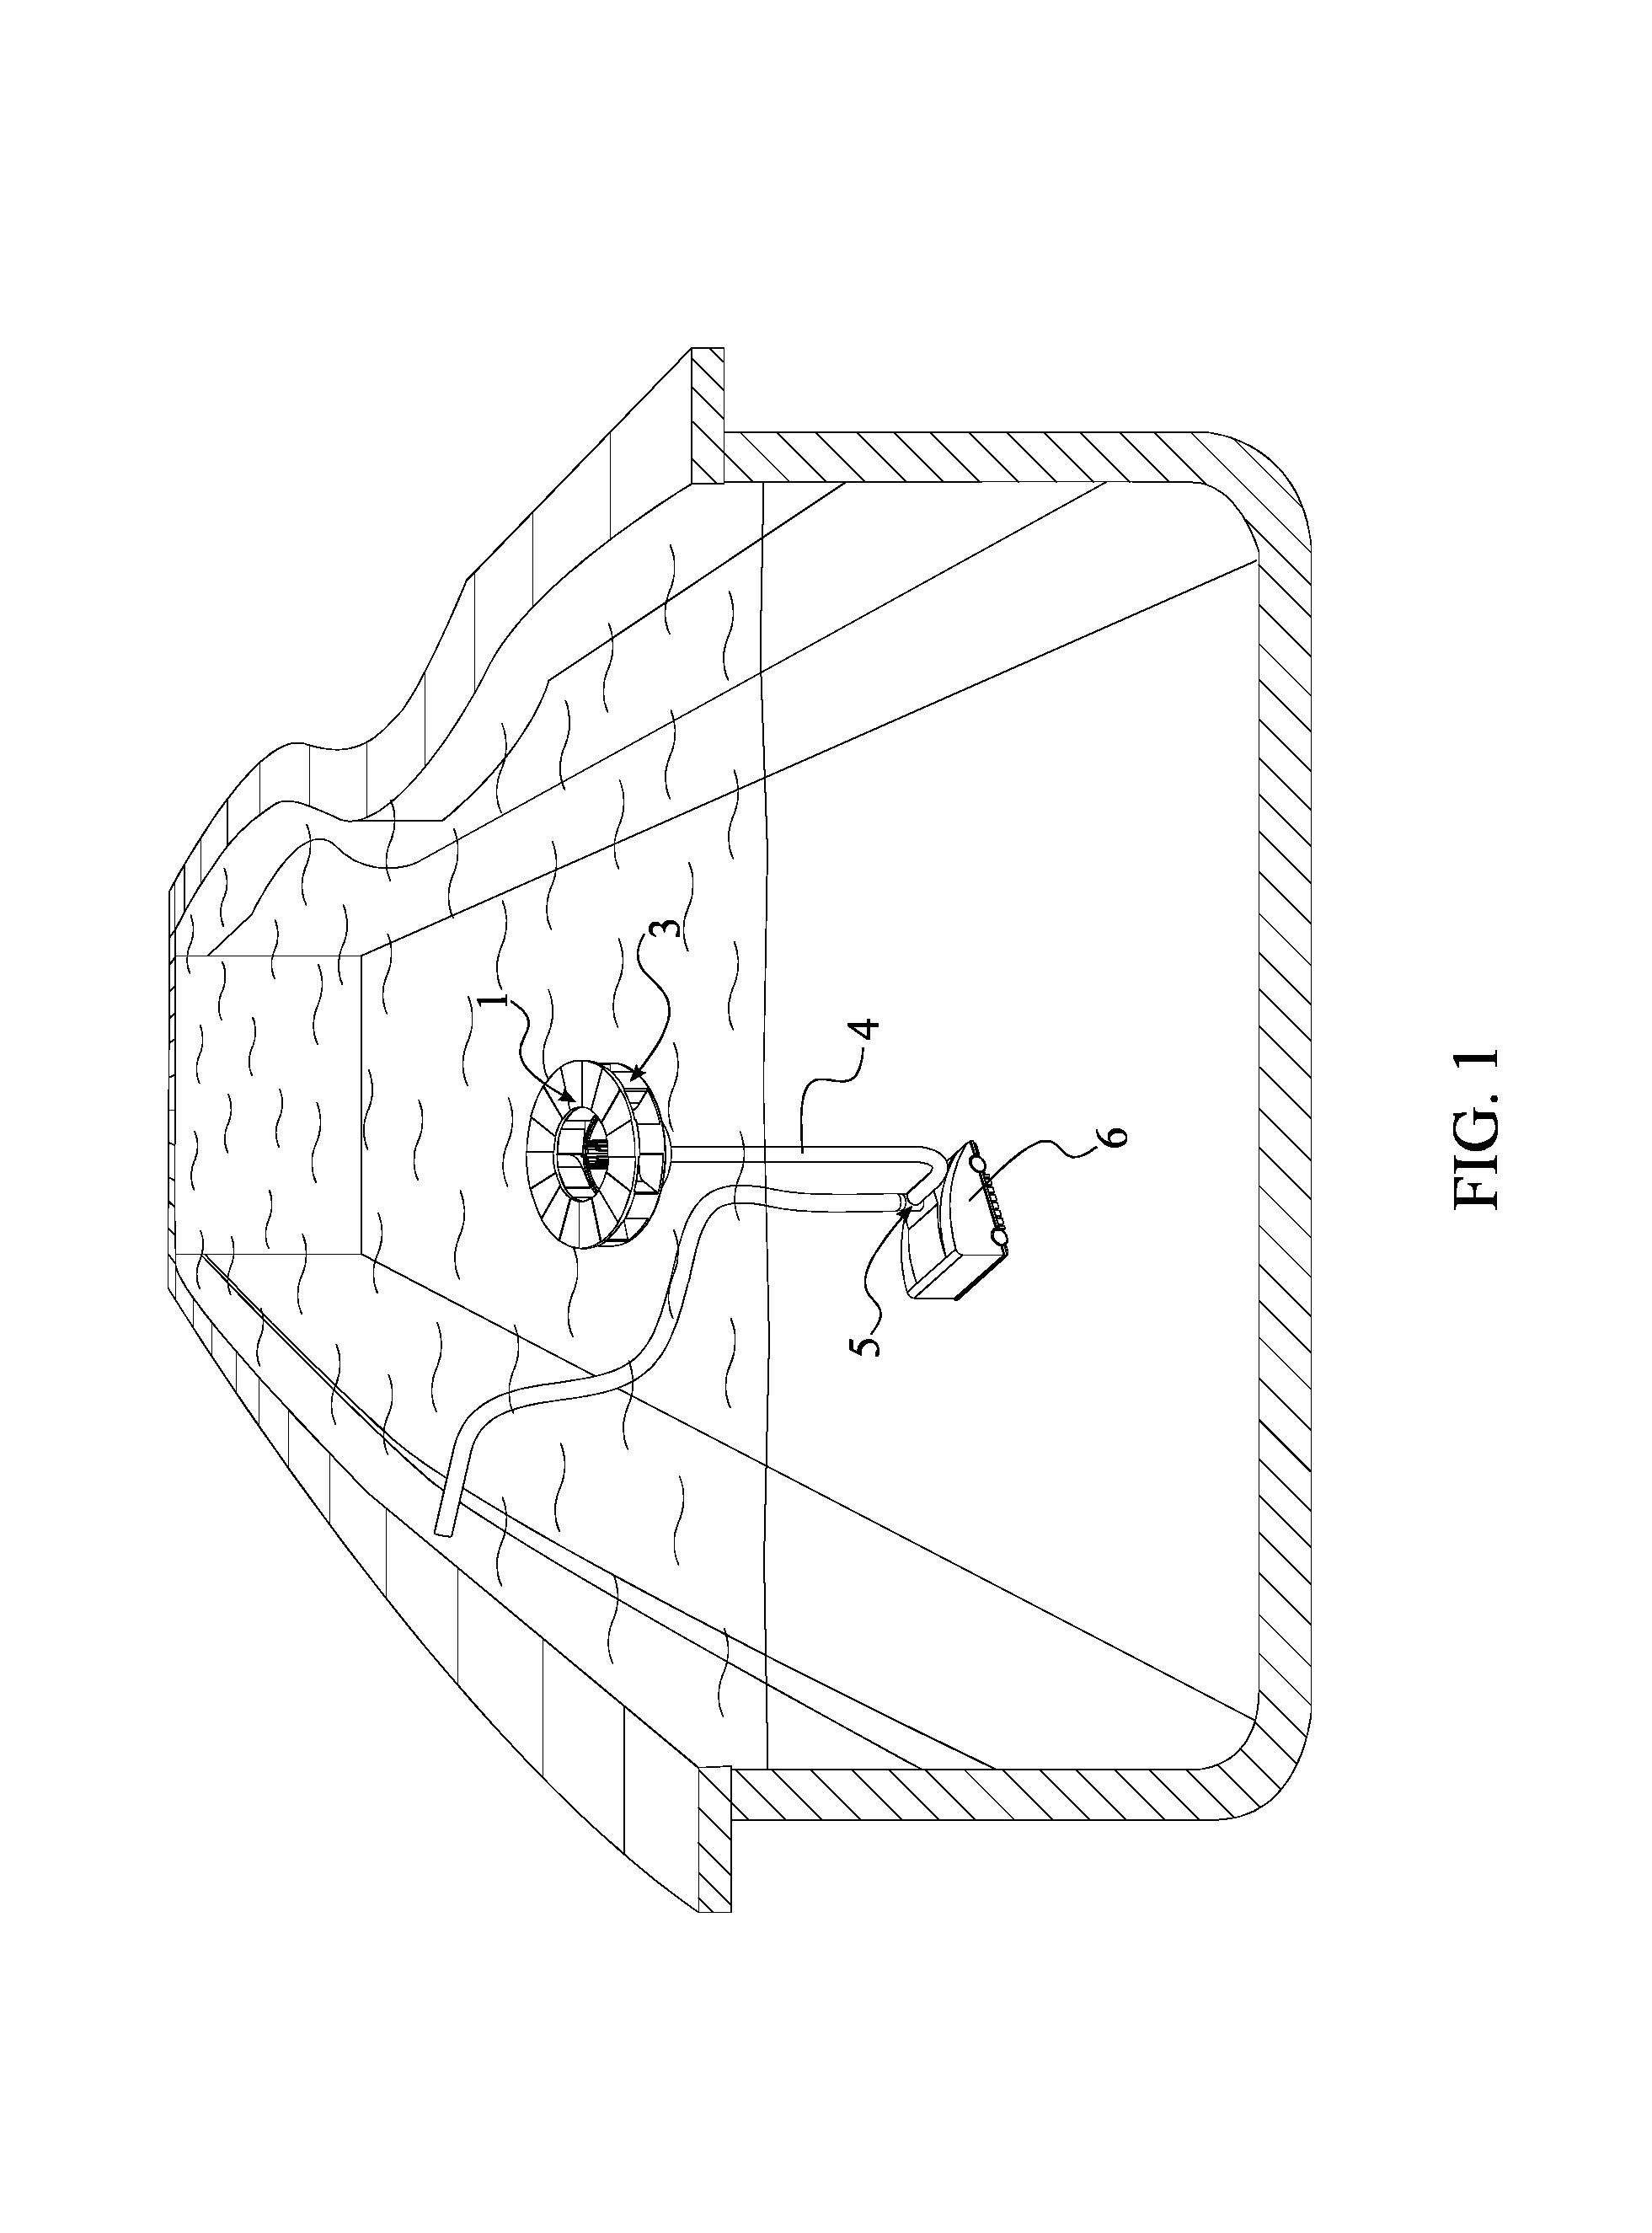 Moving and floating pool cleaner apparatus